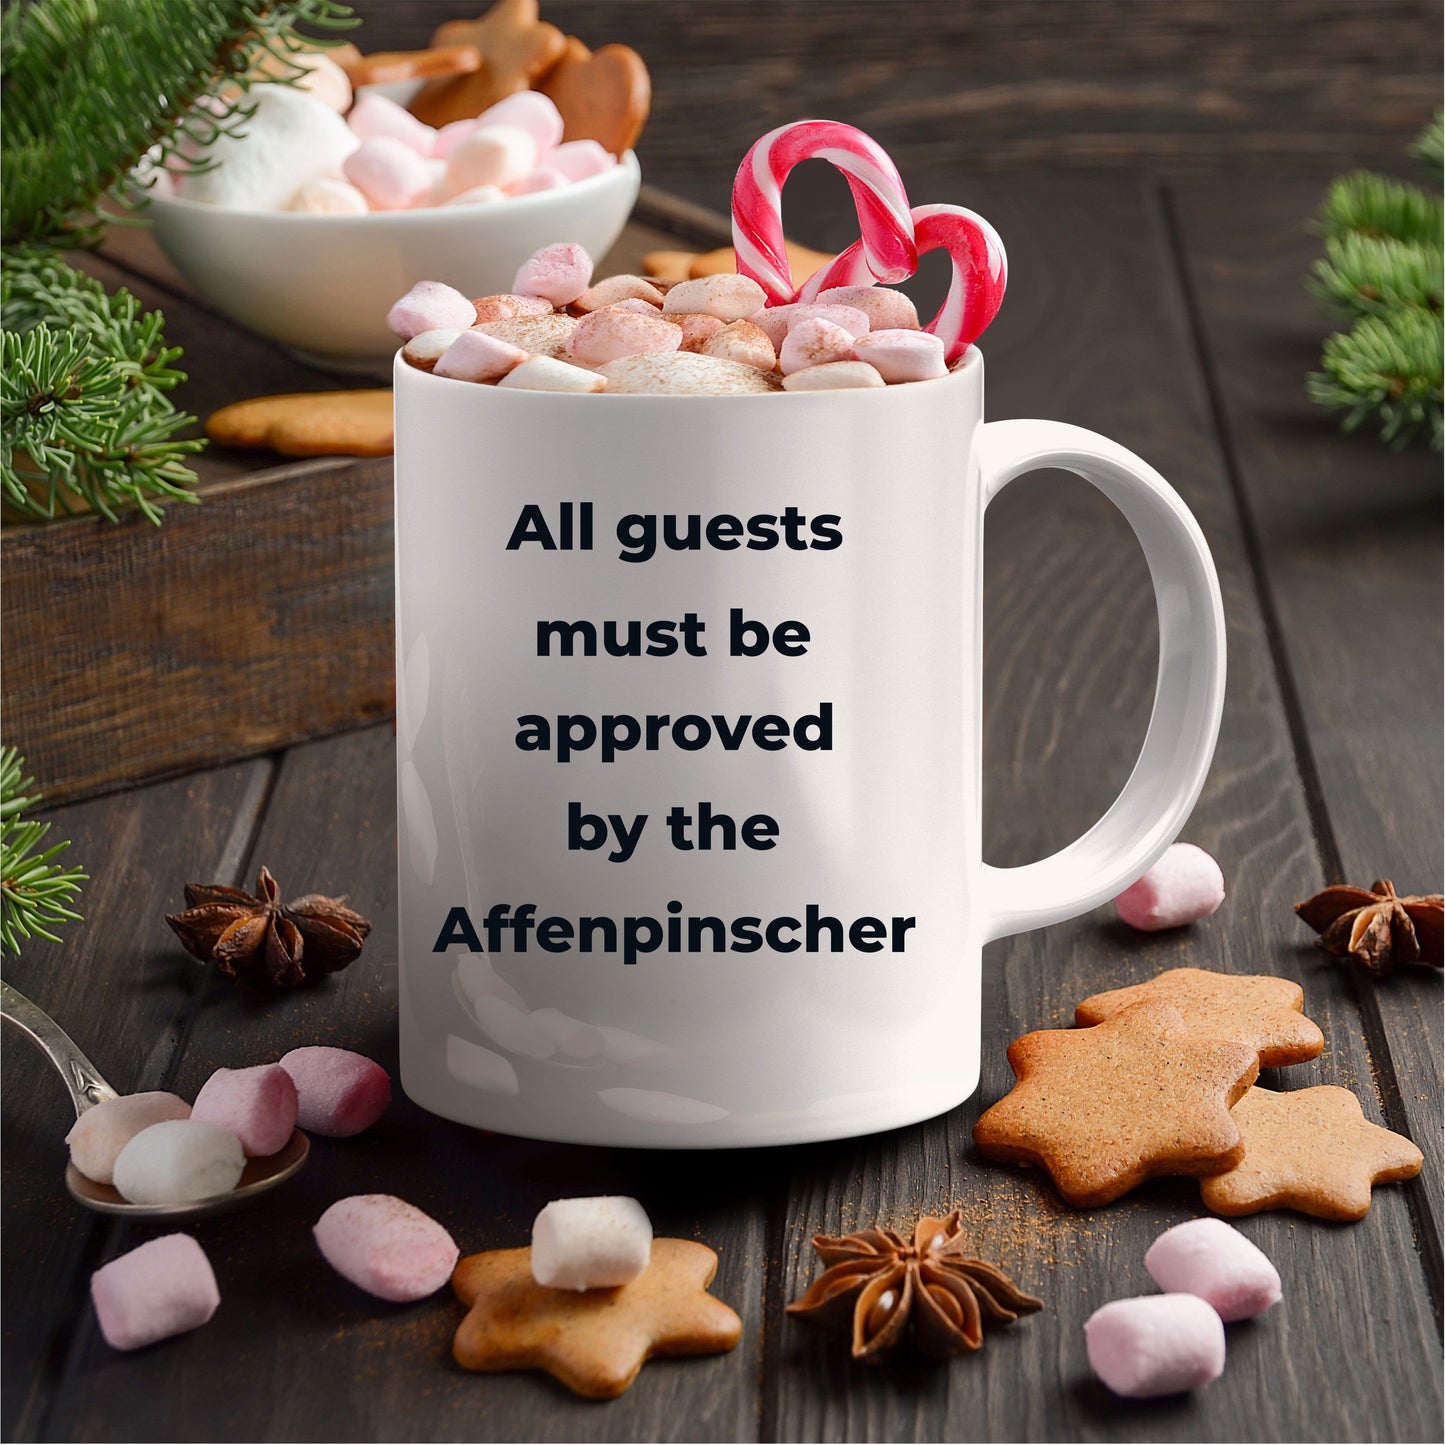 Affenpinscher dog funny coffee mug - Guests must be approved by the Affenpinscher